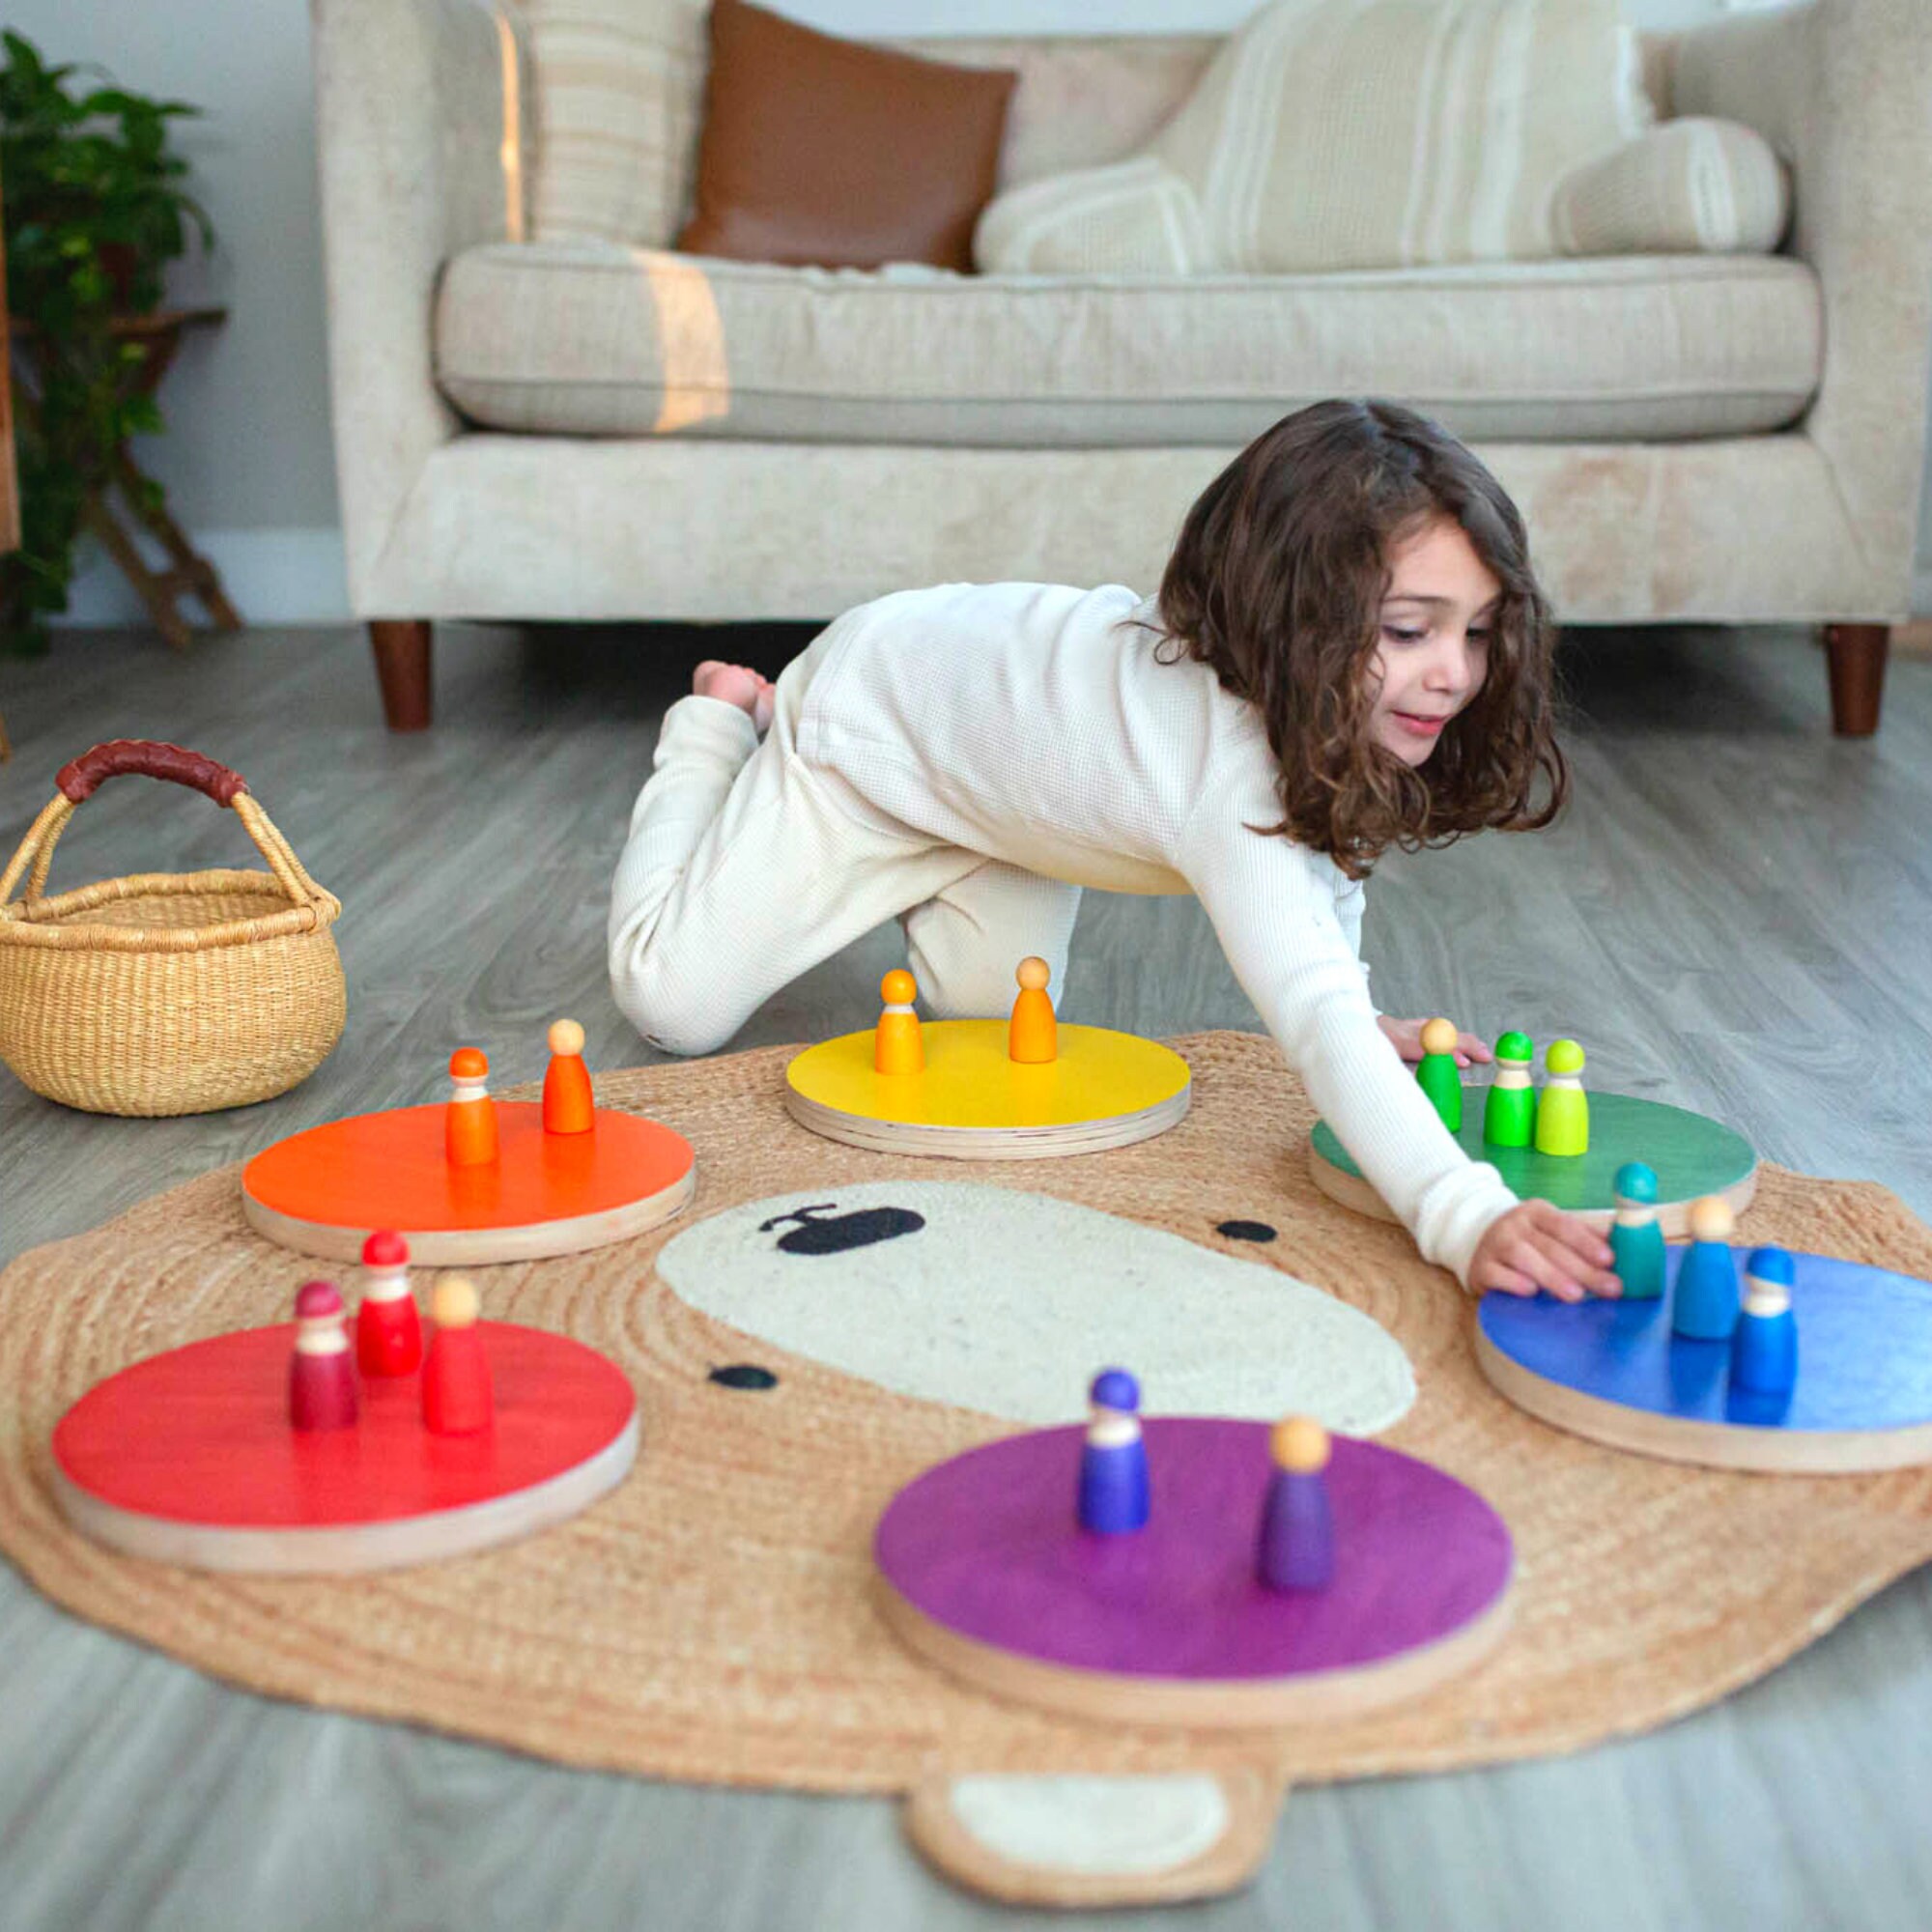 Wooden Stepping Stones, Montessori Toy, Wooden Toys for Kids